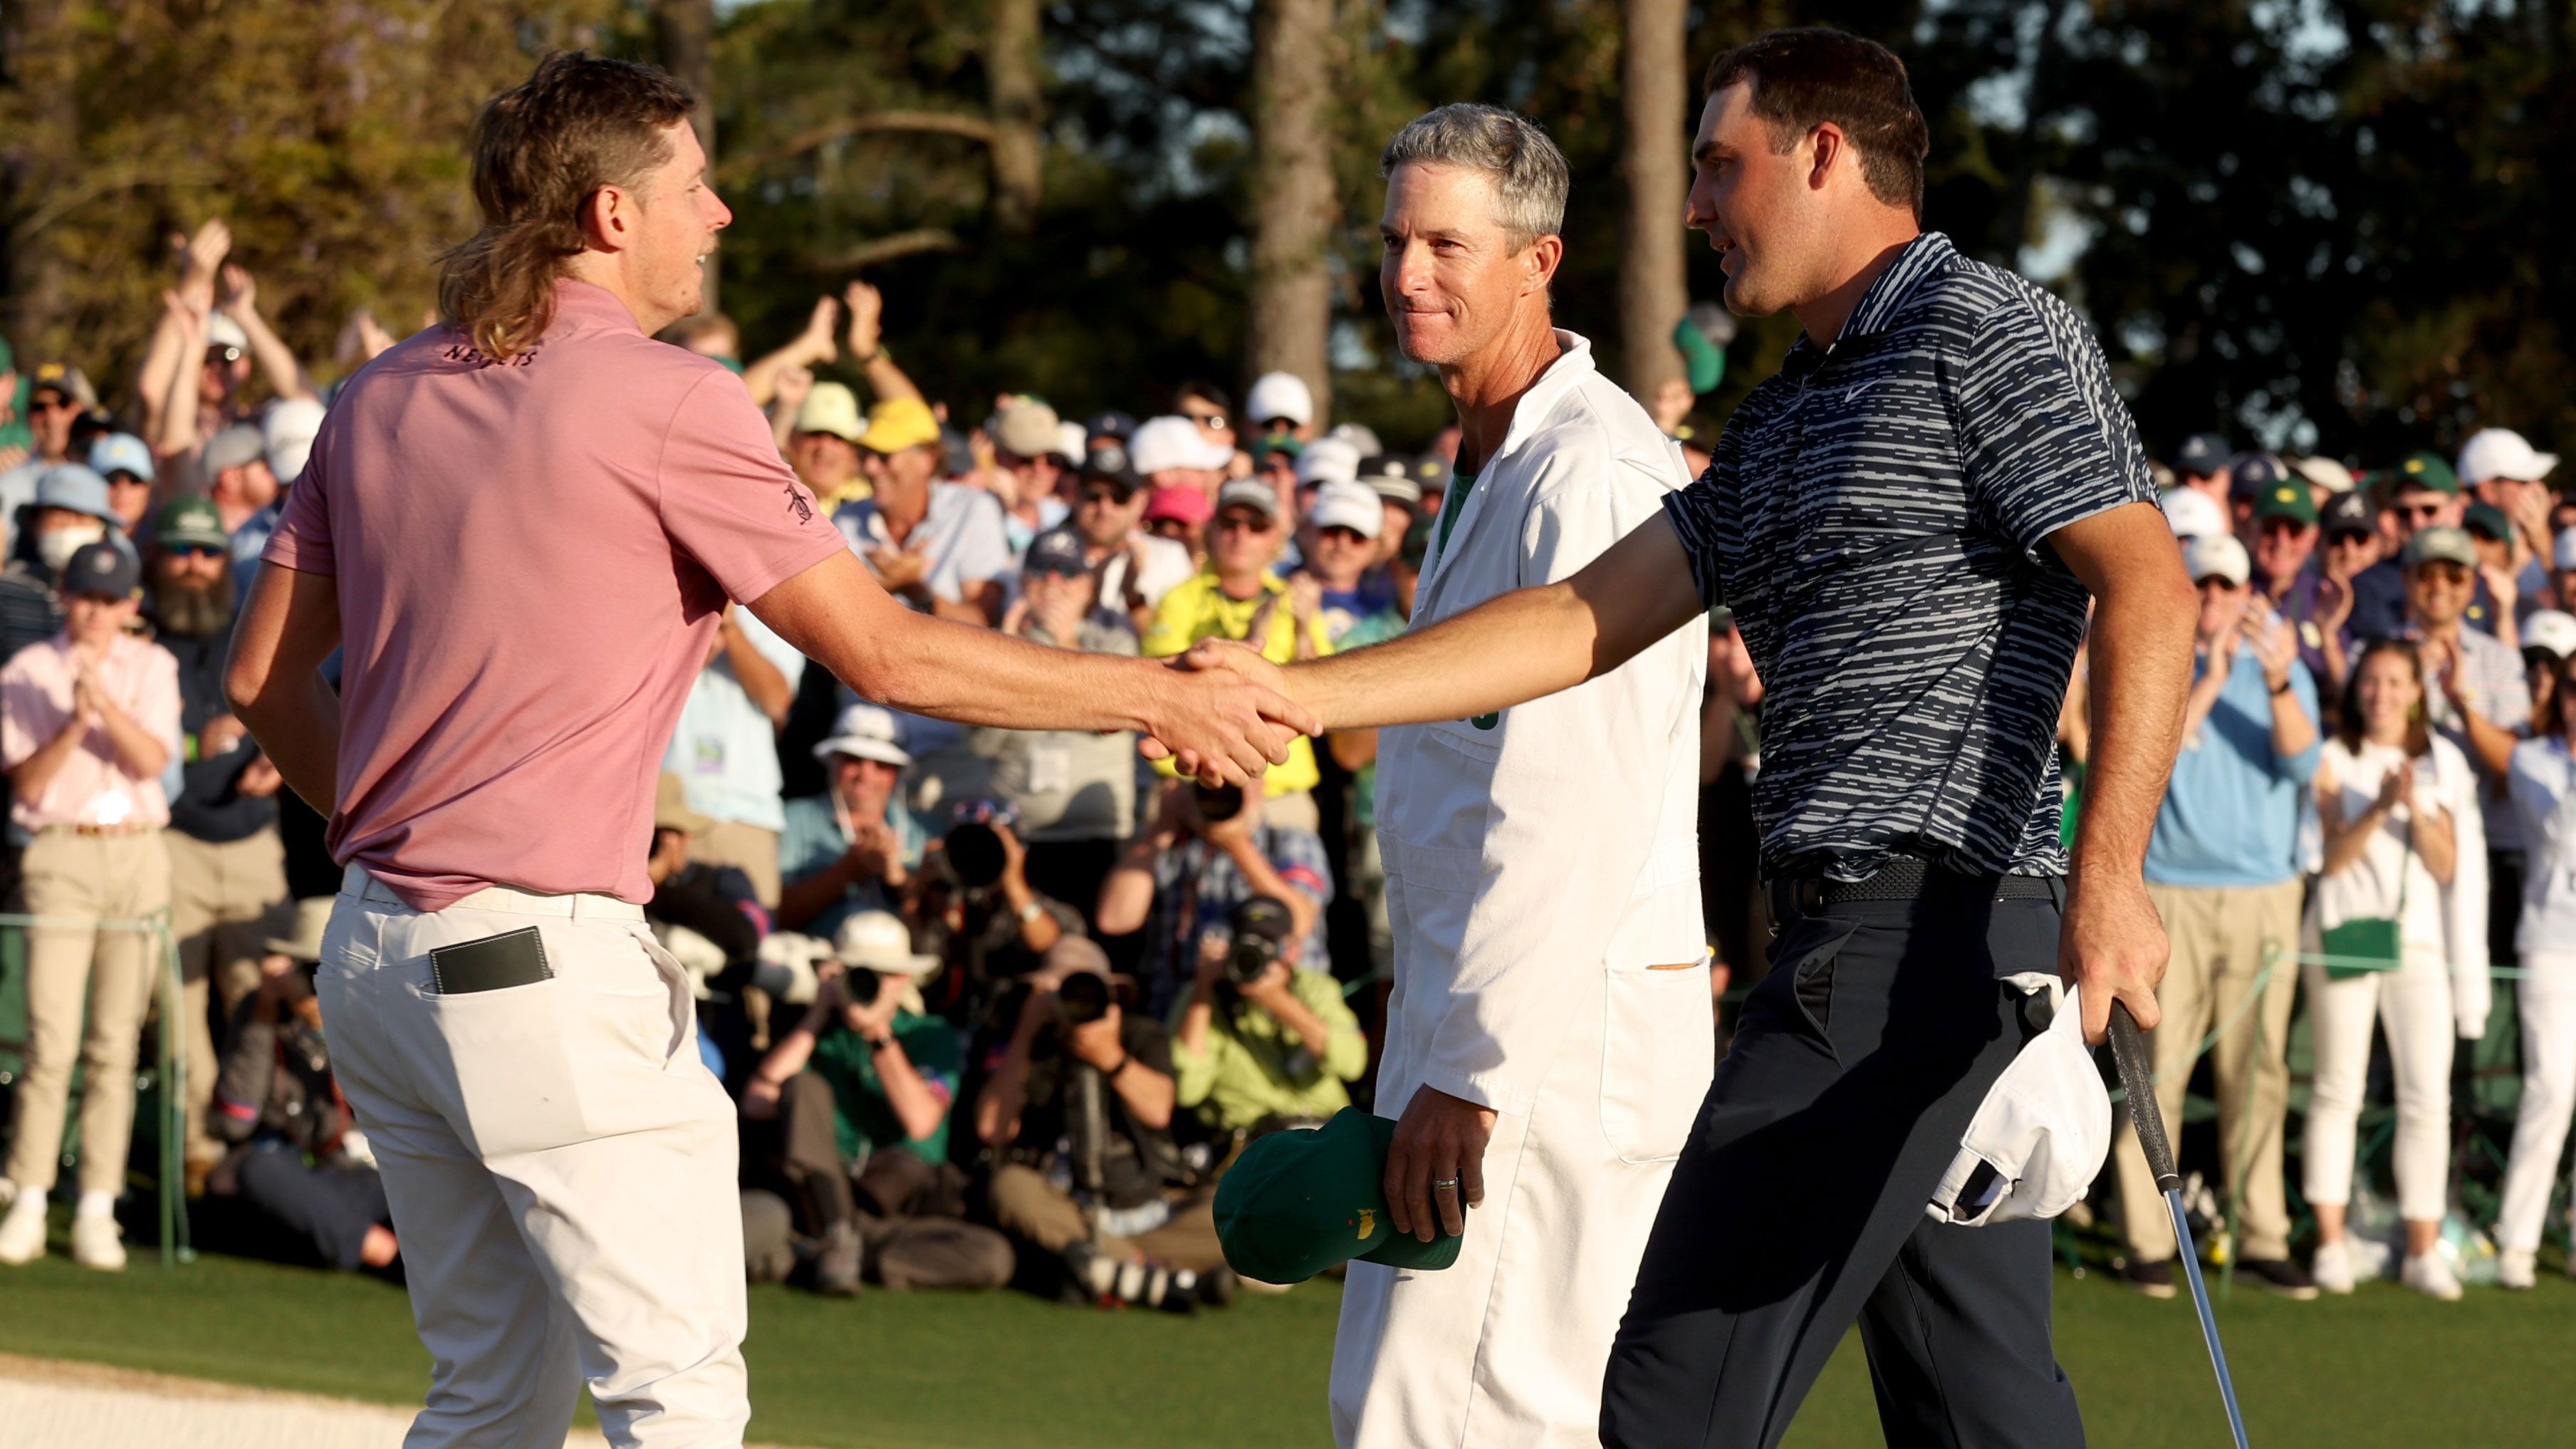 Cameron Smith of Australia (L) and Scottie Scheffler shake hands on the 18th green after Scheffler won the Masters at Augusta National.